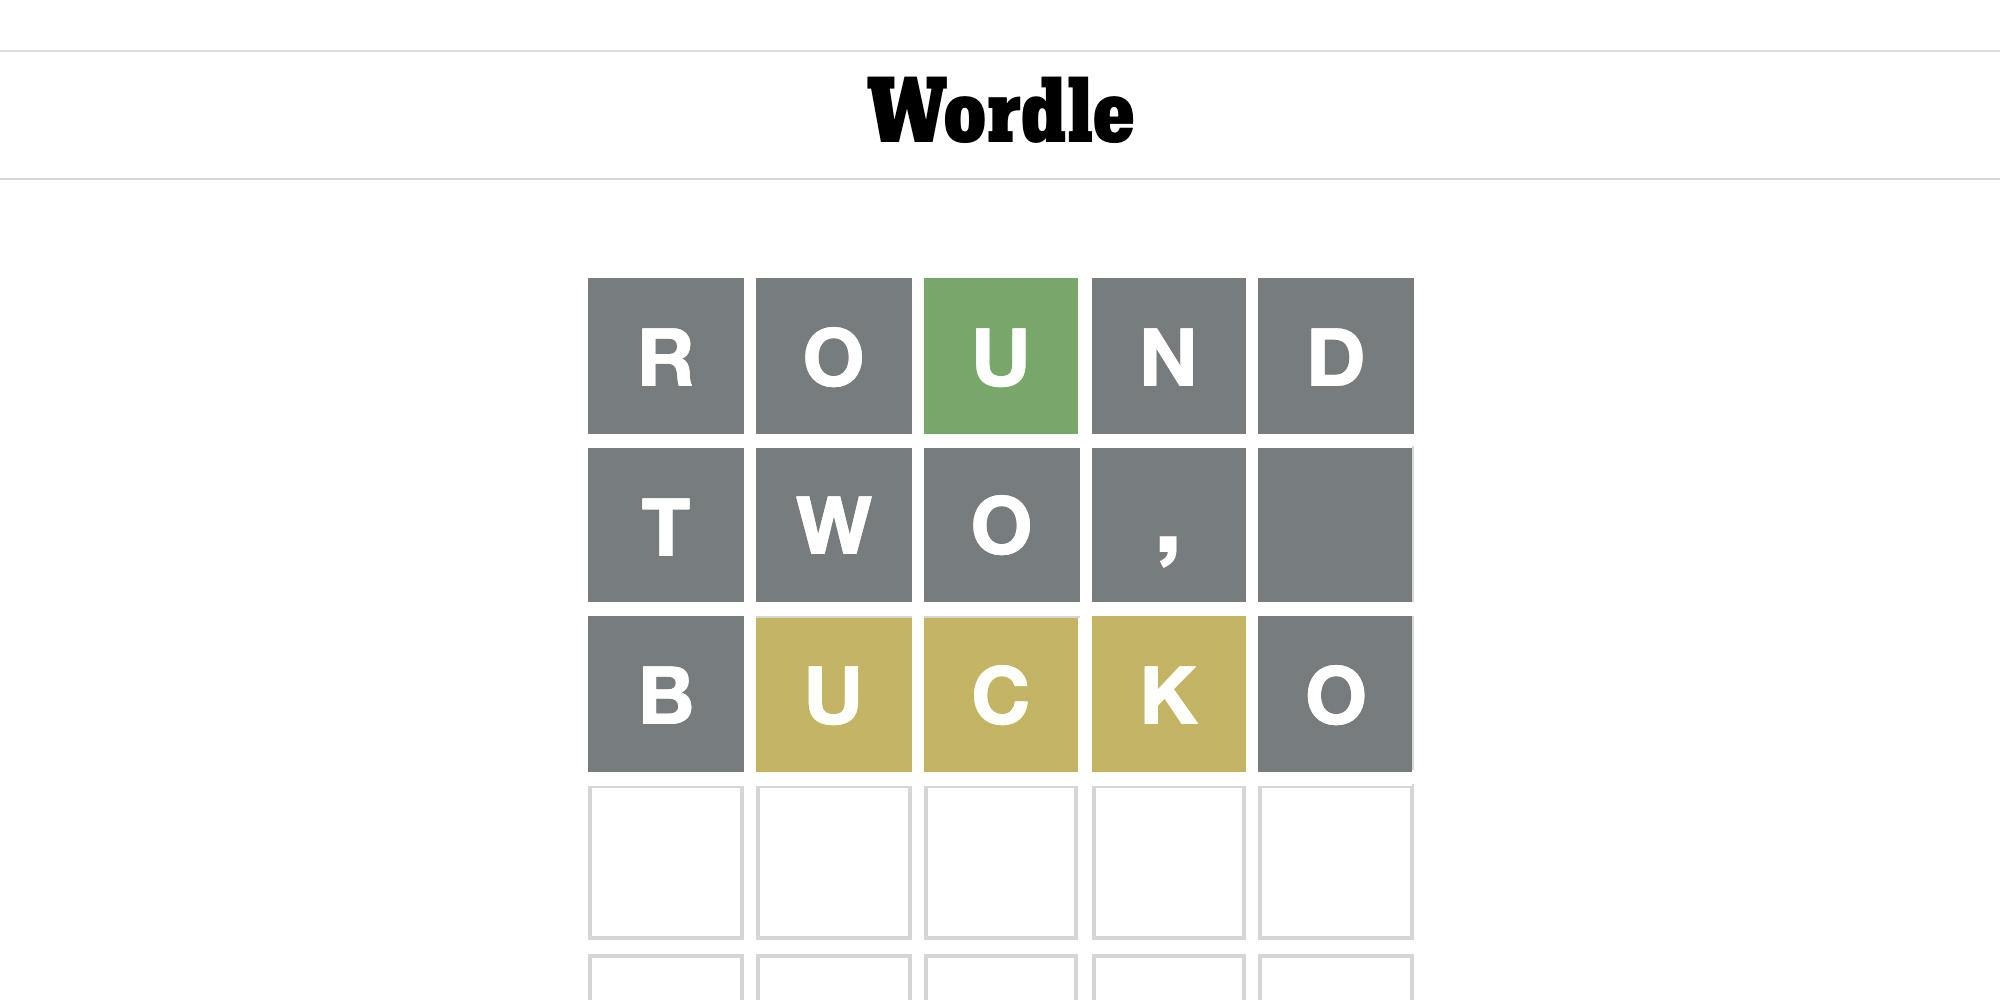 a game of Wordle that spells out "Round two, bucko"